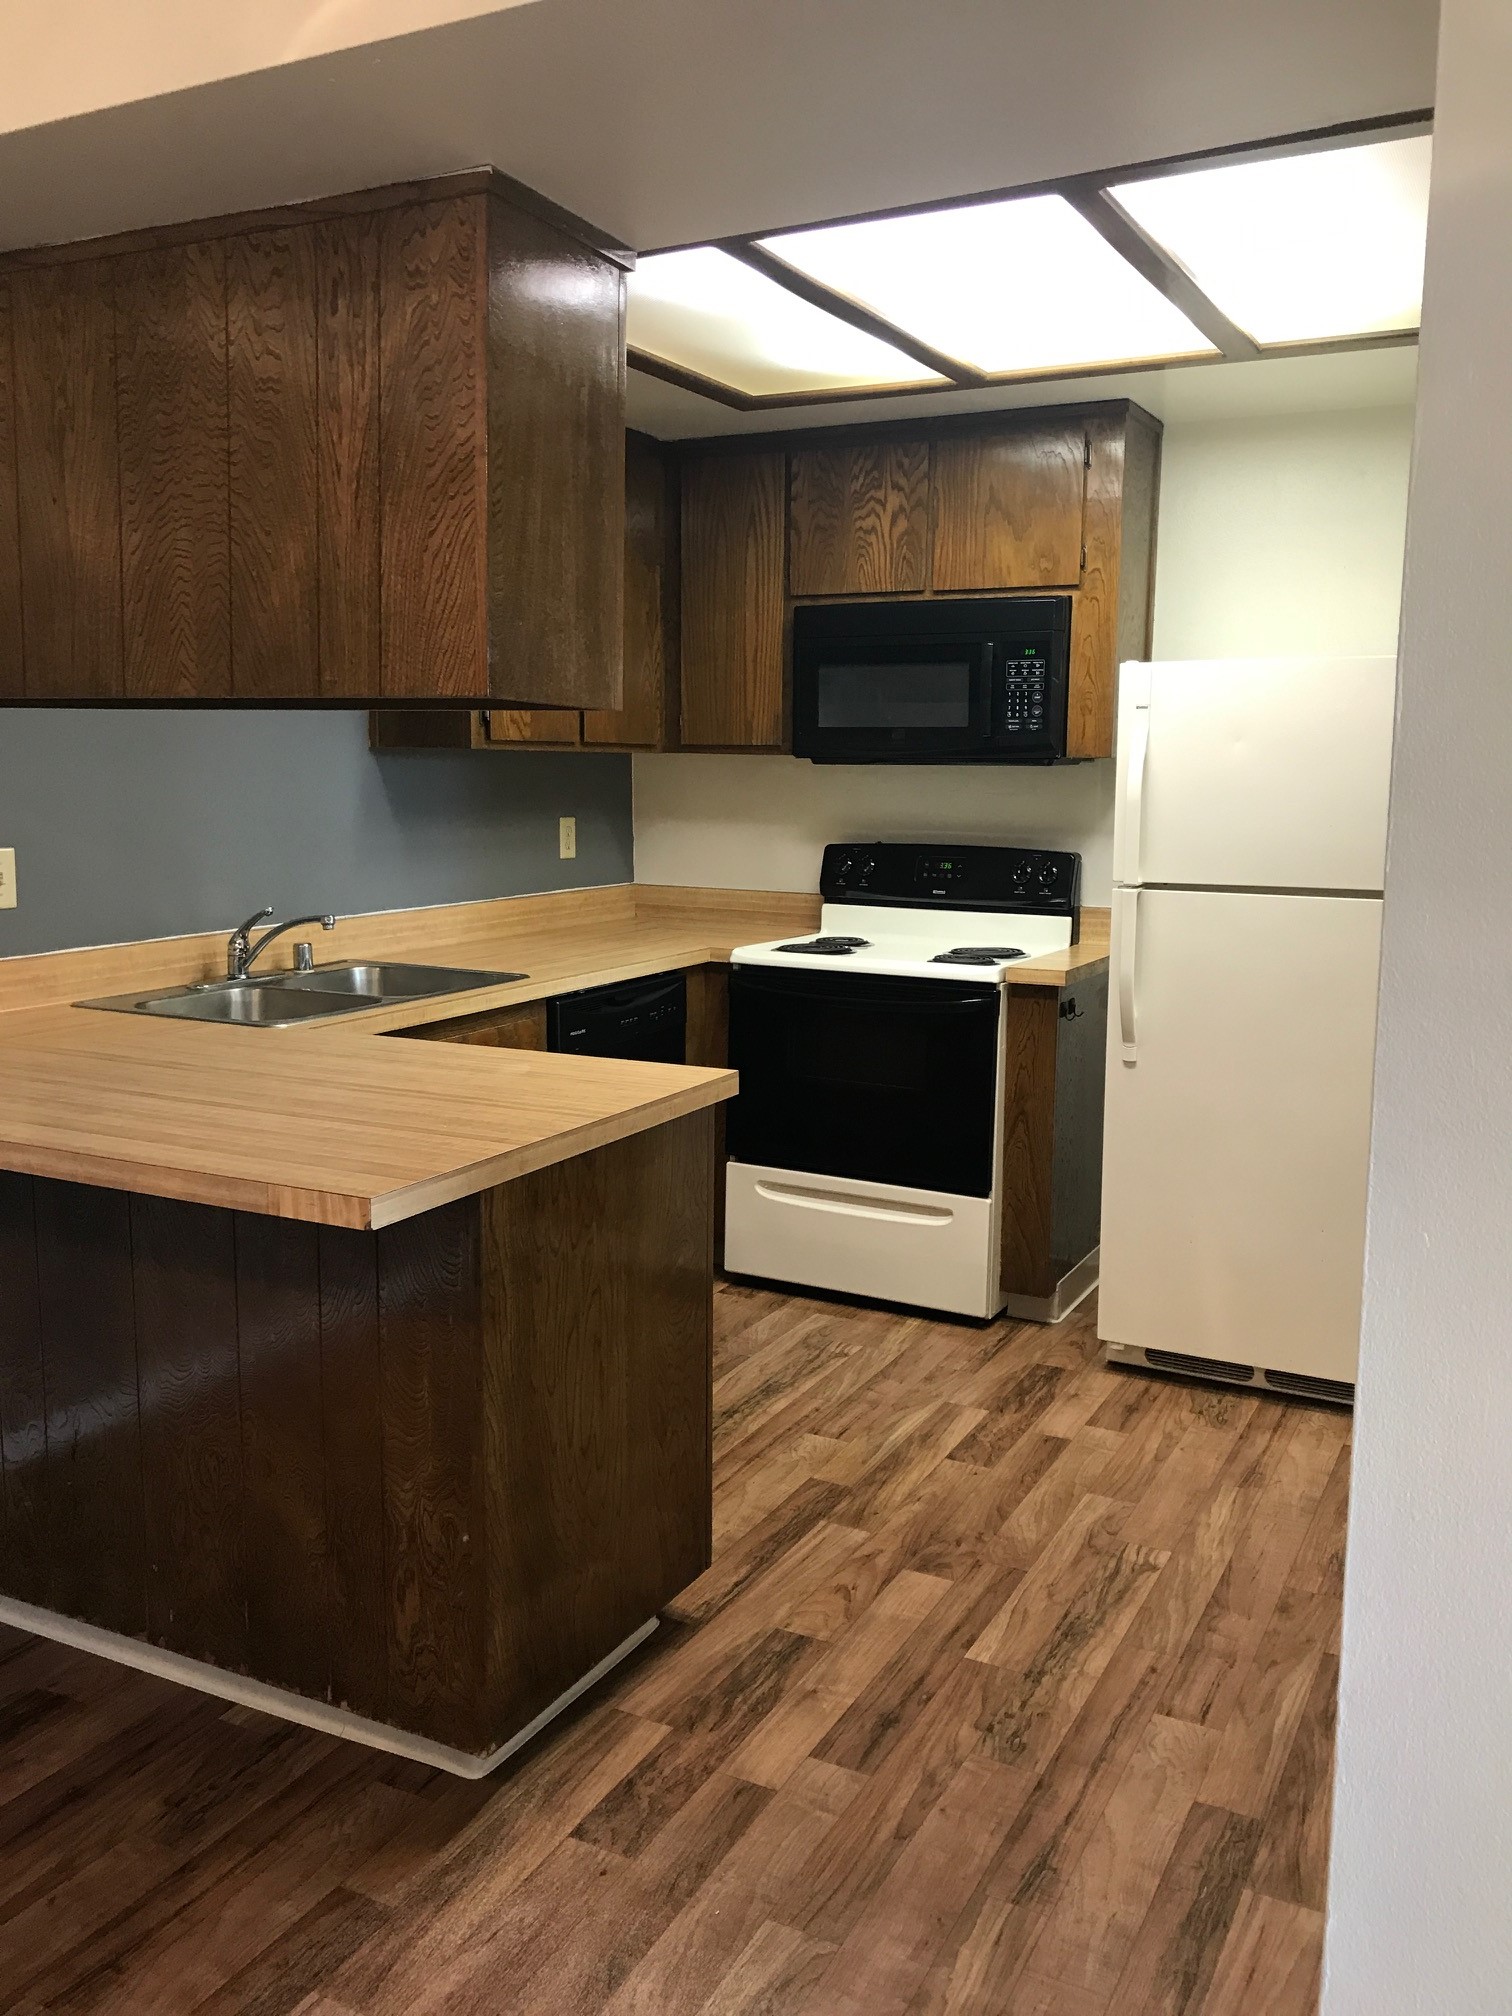 Vacant kitchen with wooden floors